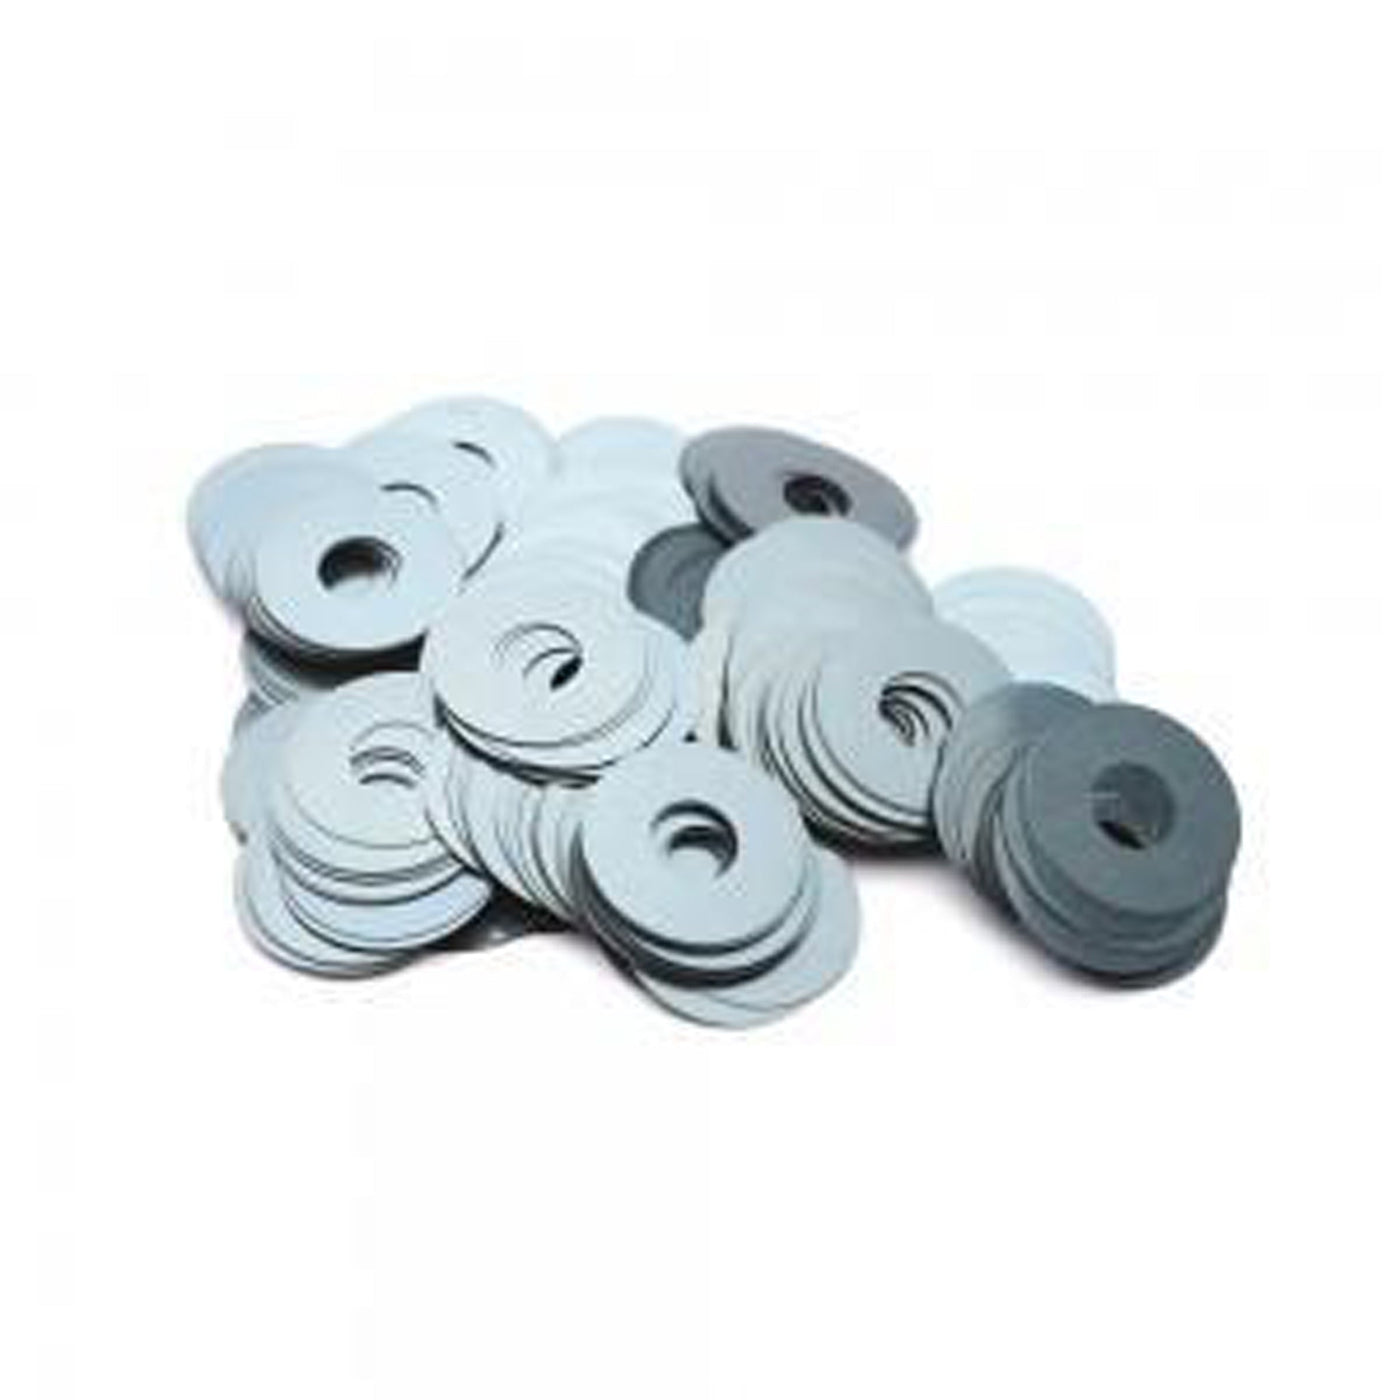 3/8 Imperial Suspension Shims